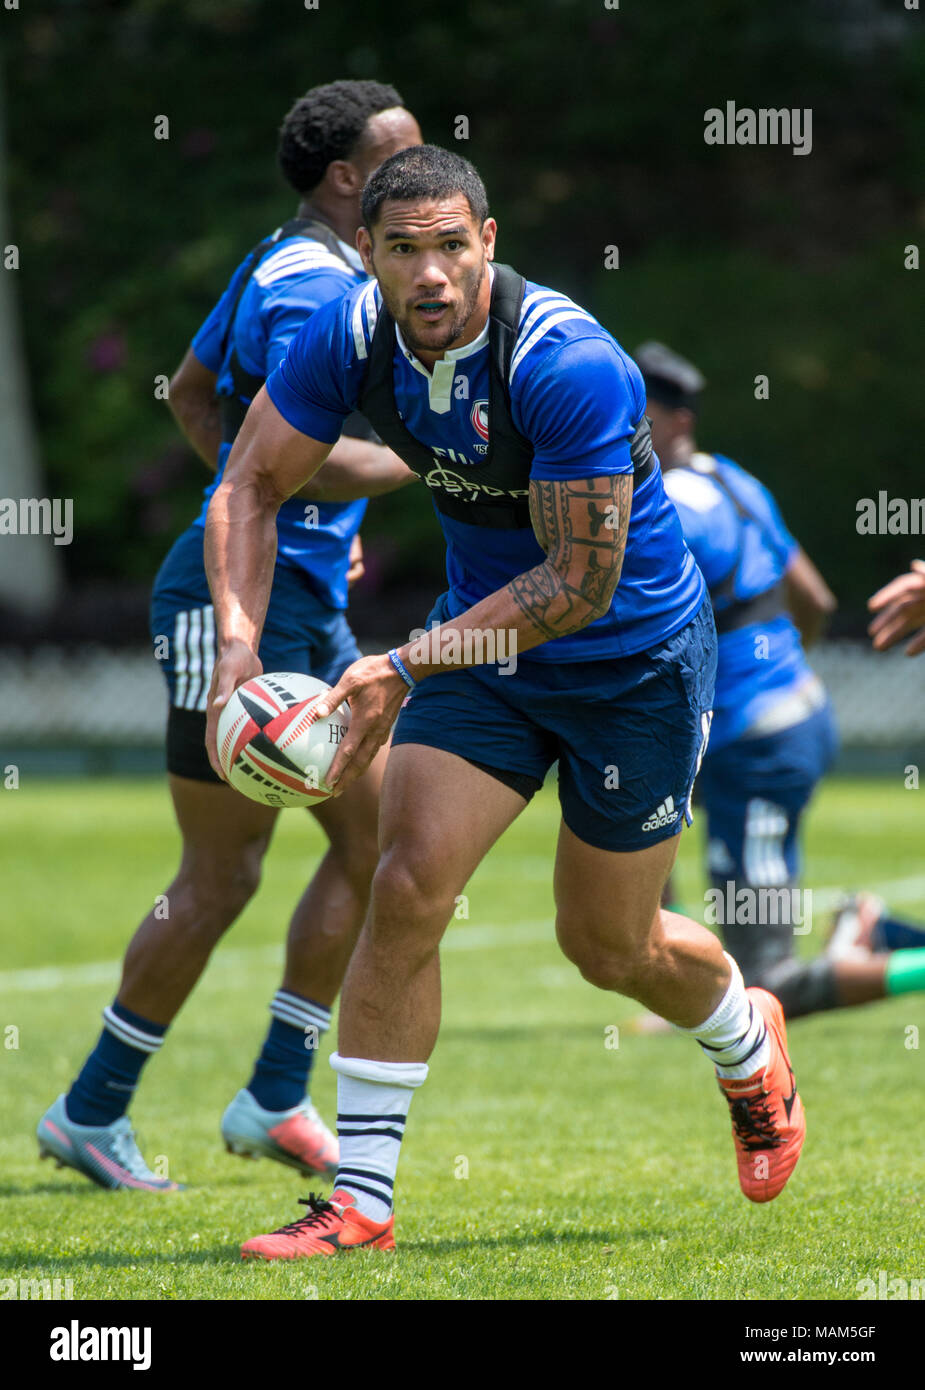 HONG KONG,HONG KONG SAR,CHINA:April 3rd 2018. The USA Rugby team conduct a training session at So Kon Po recreation ground ahead of their Hong Kong Rugby 7's matches. Martin Iosefo passes the ball during drills.Alamy Live News Stock Photo